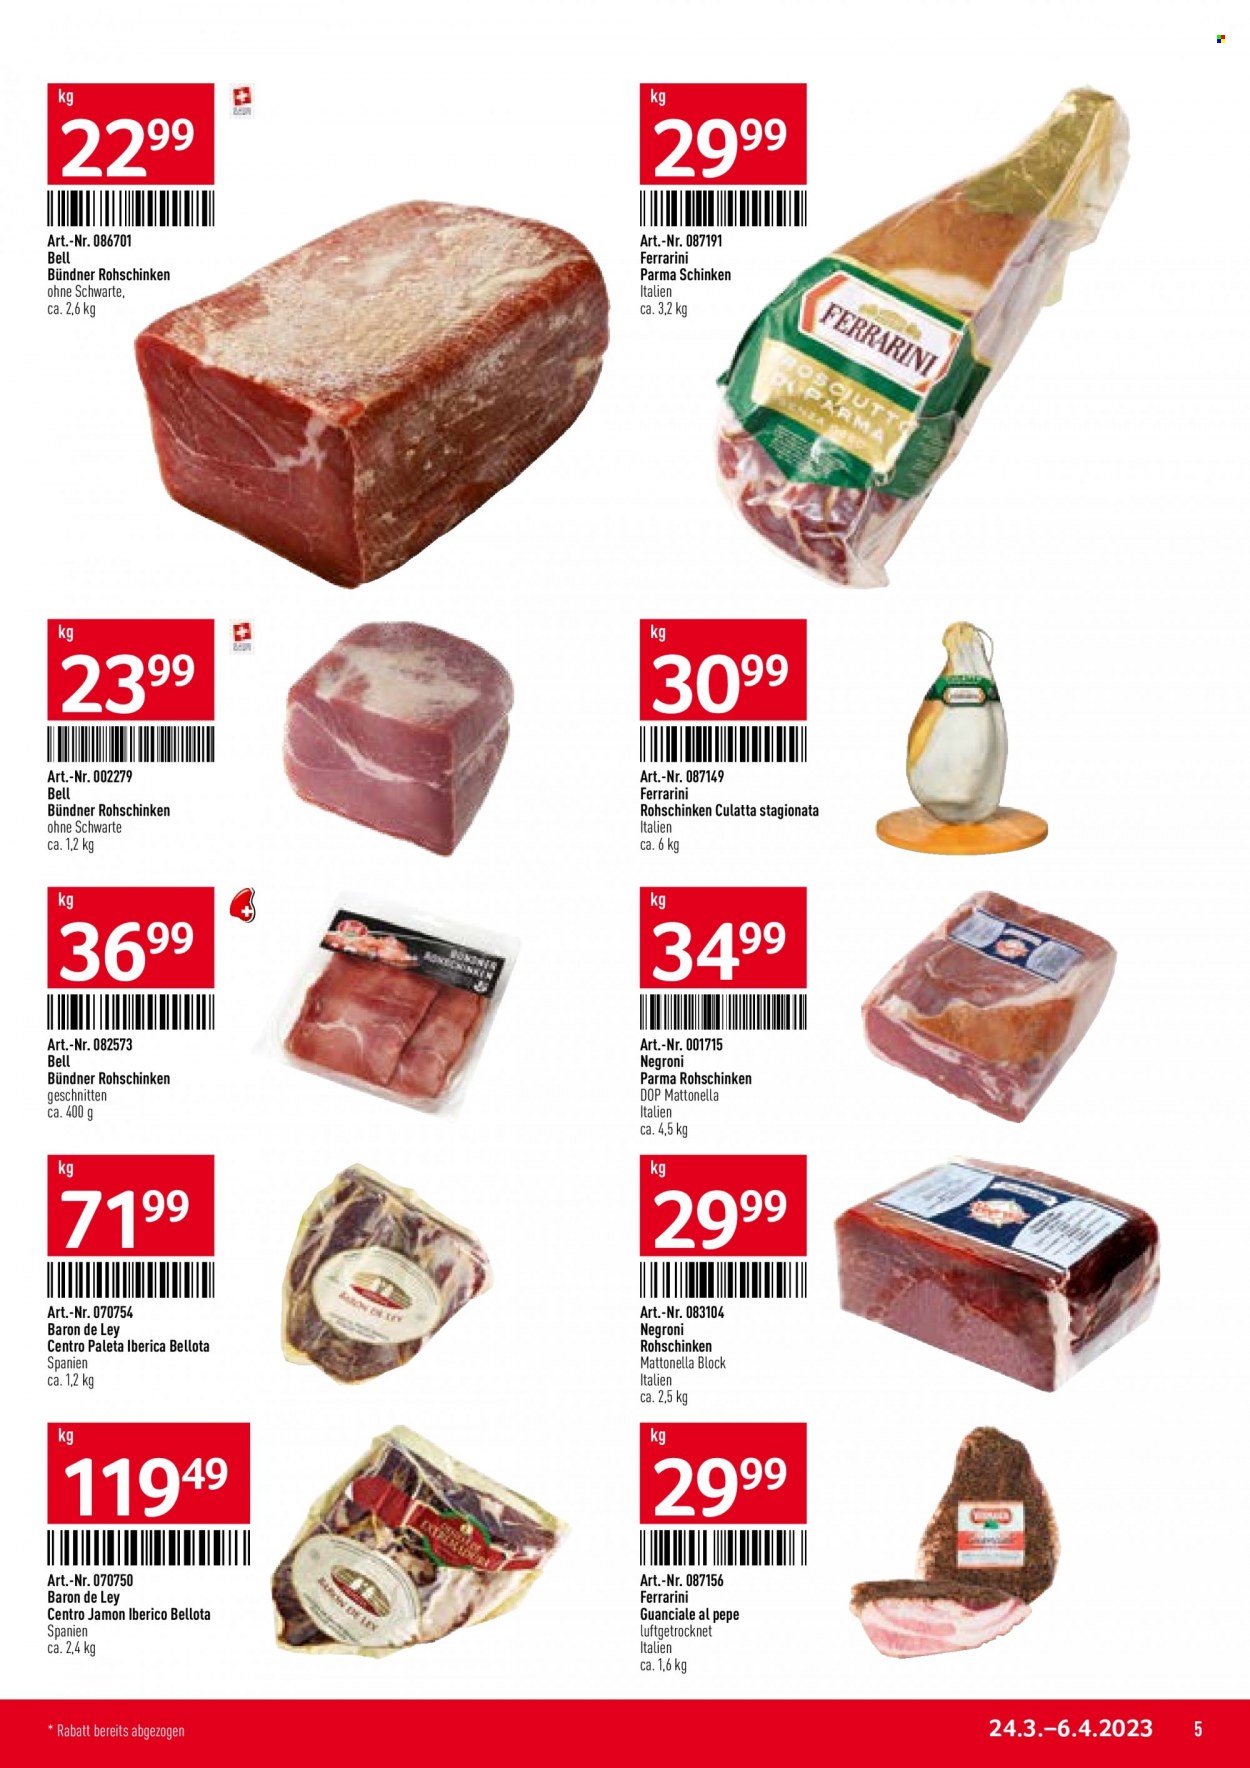 Catalogue TransGourmet - 24.3.2023 - 6.4.2023. Page 5.